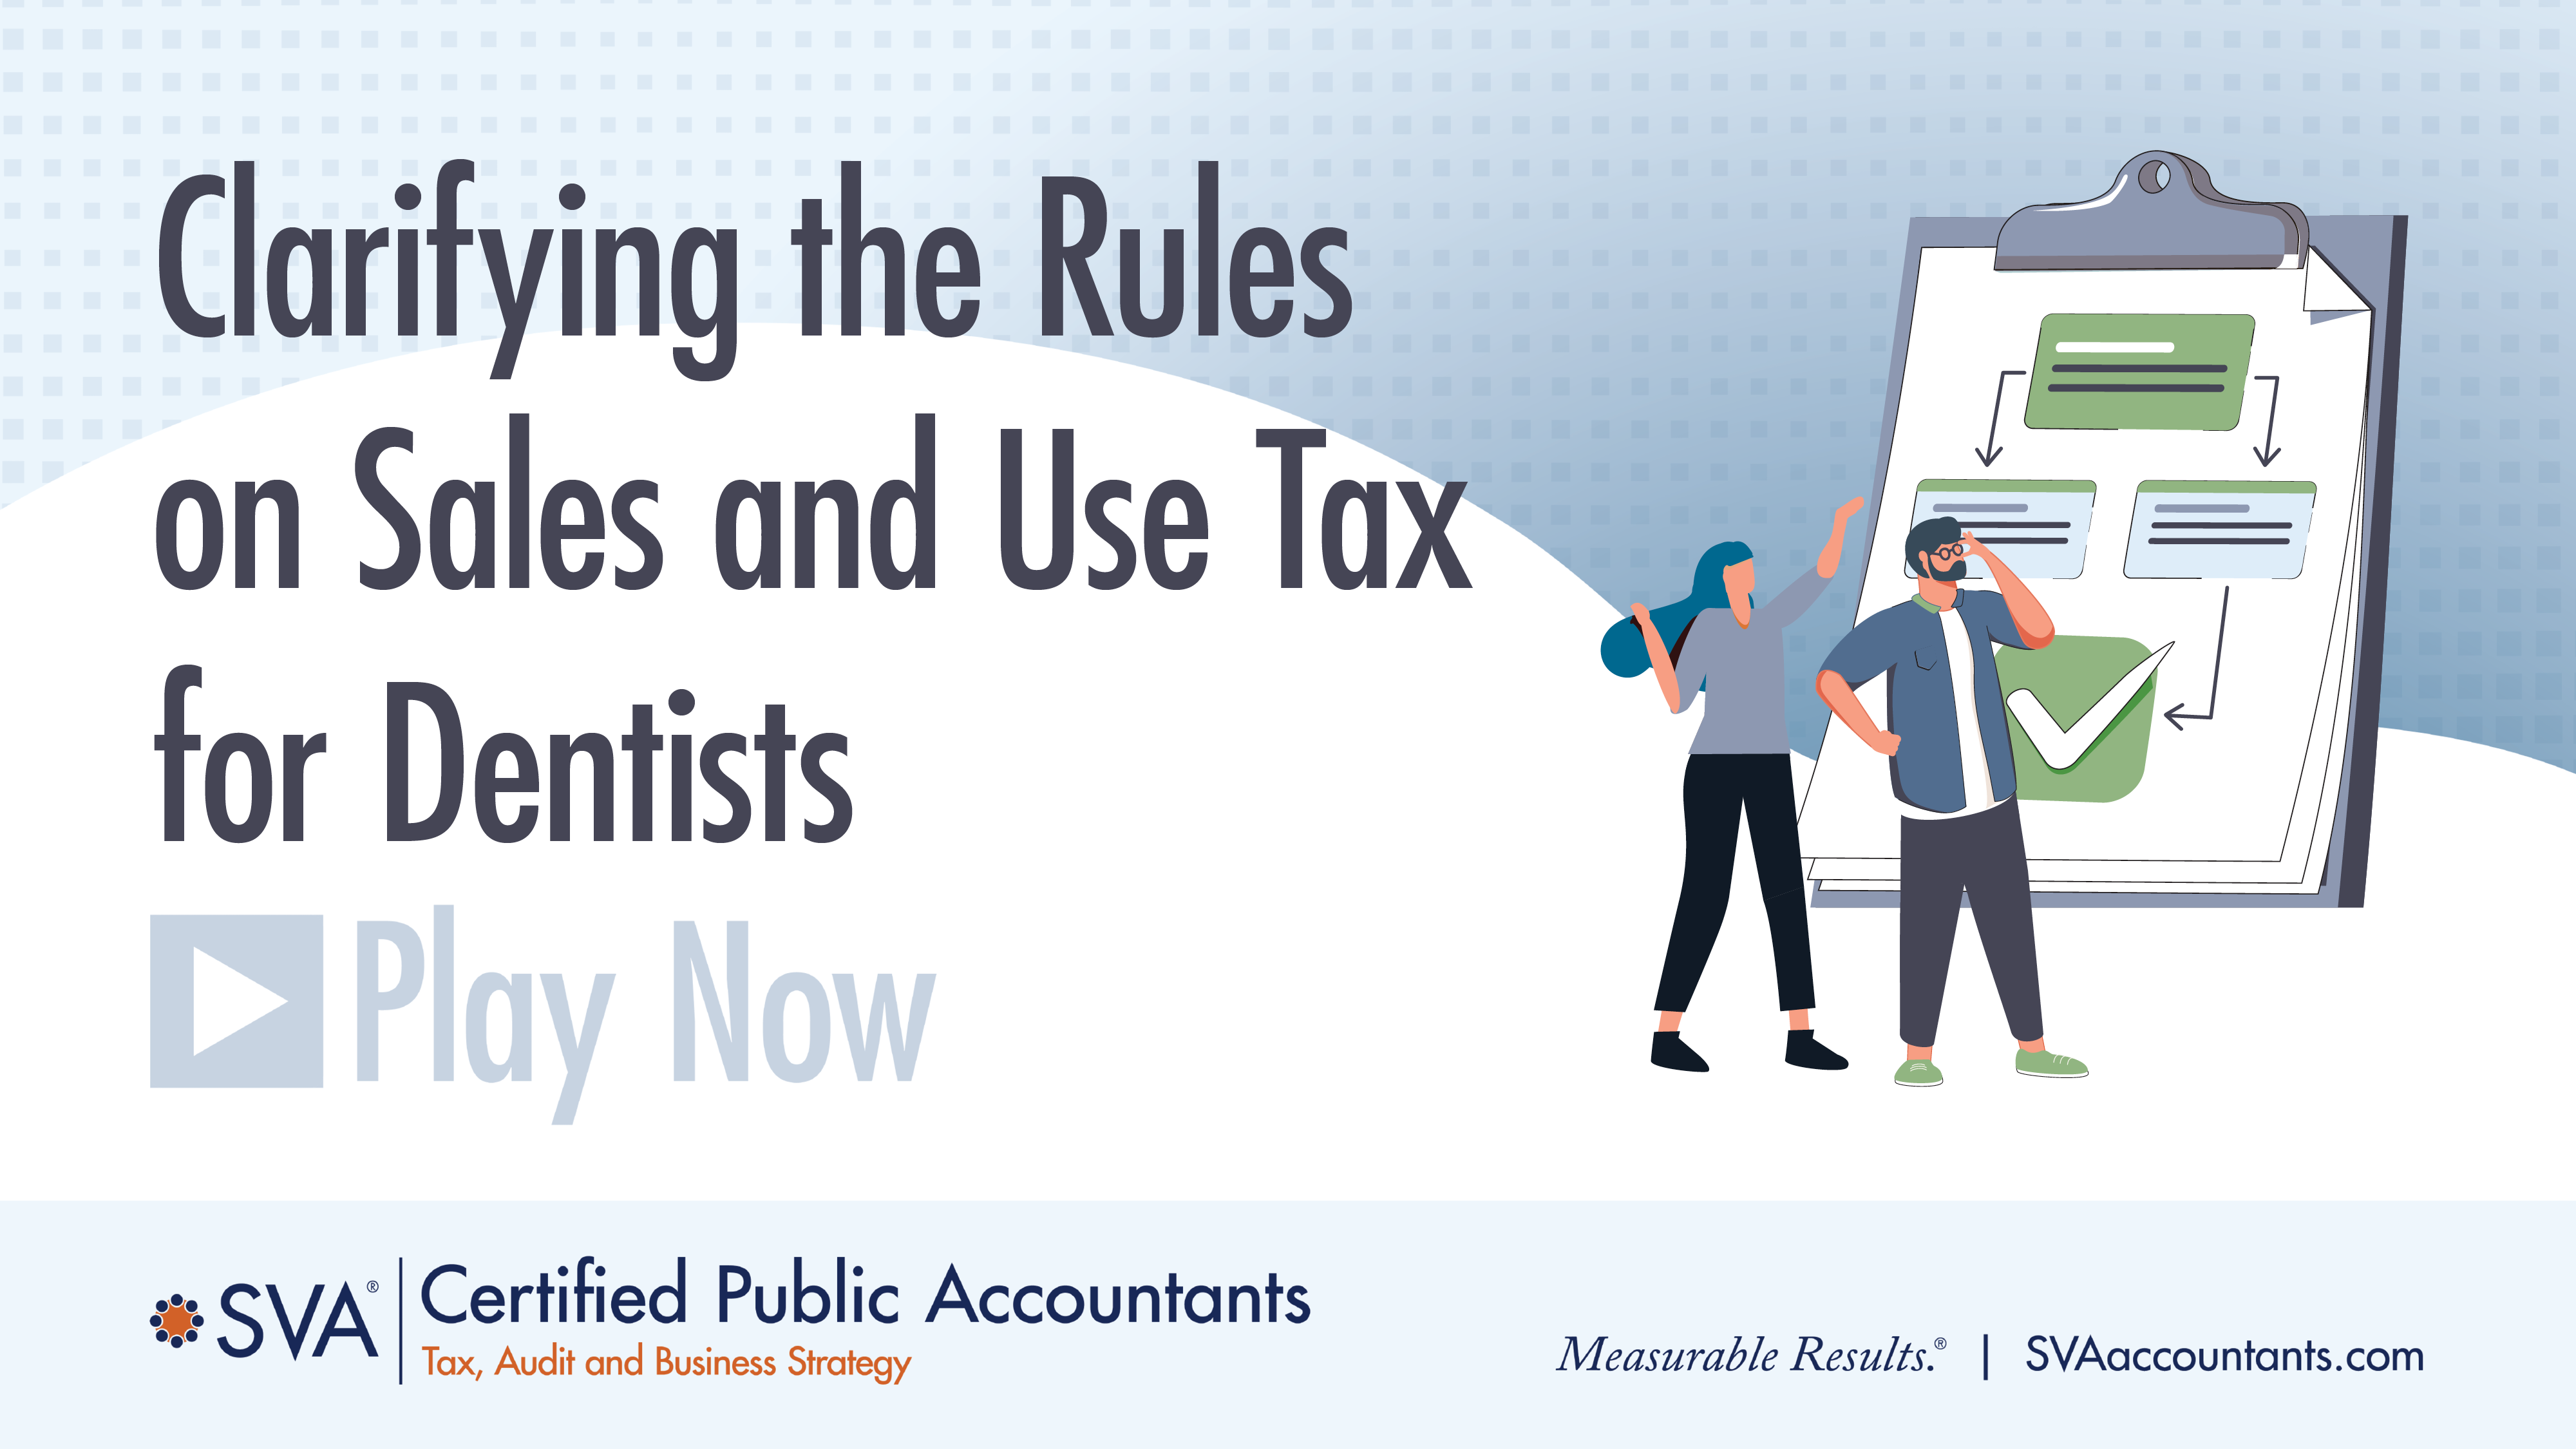 Clarifying the Rules on Sales and Use Tax for Dentists